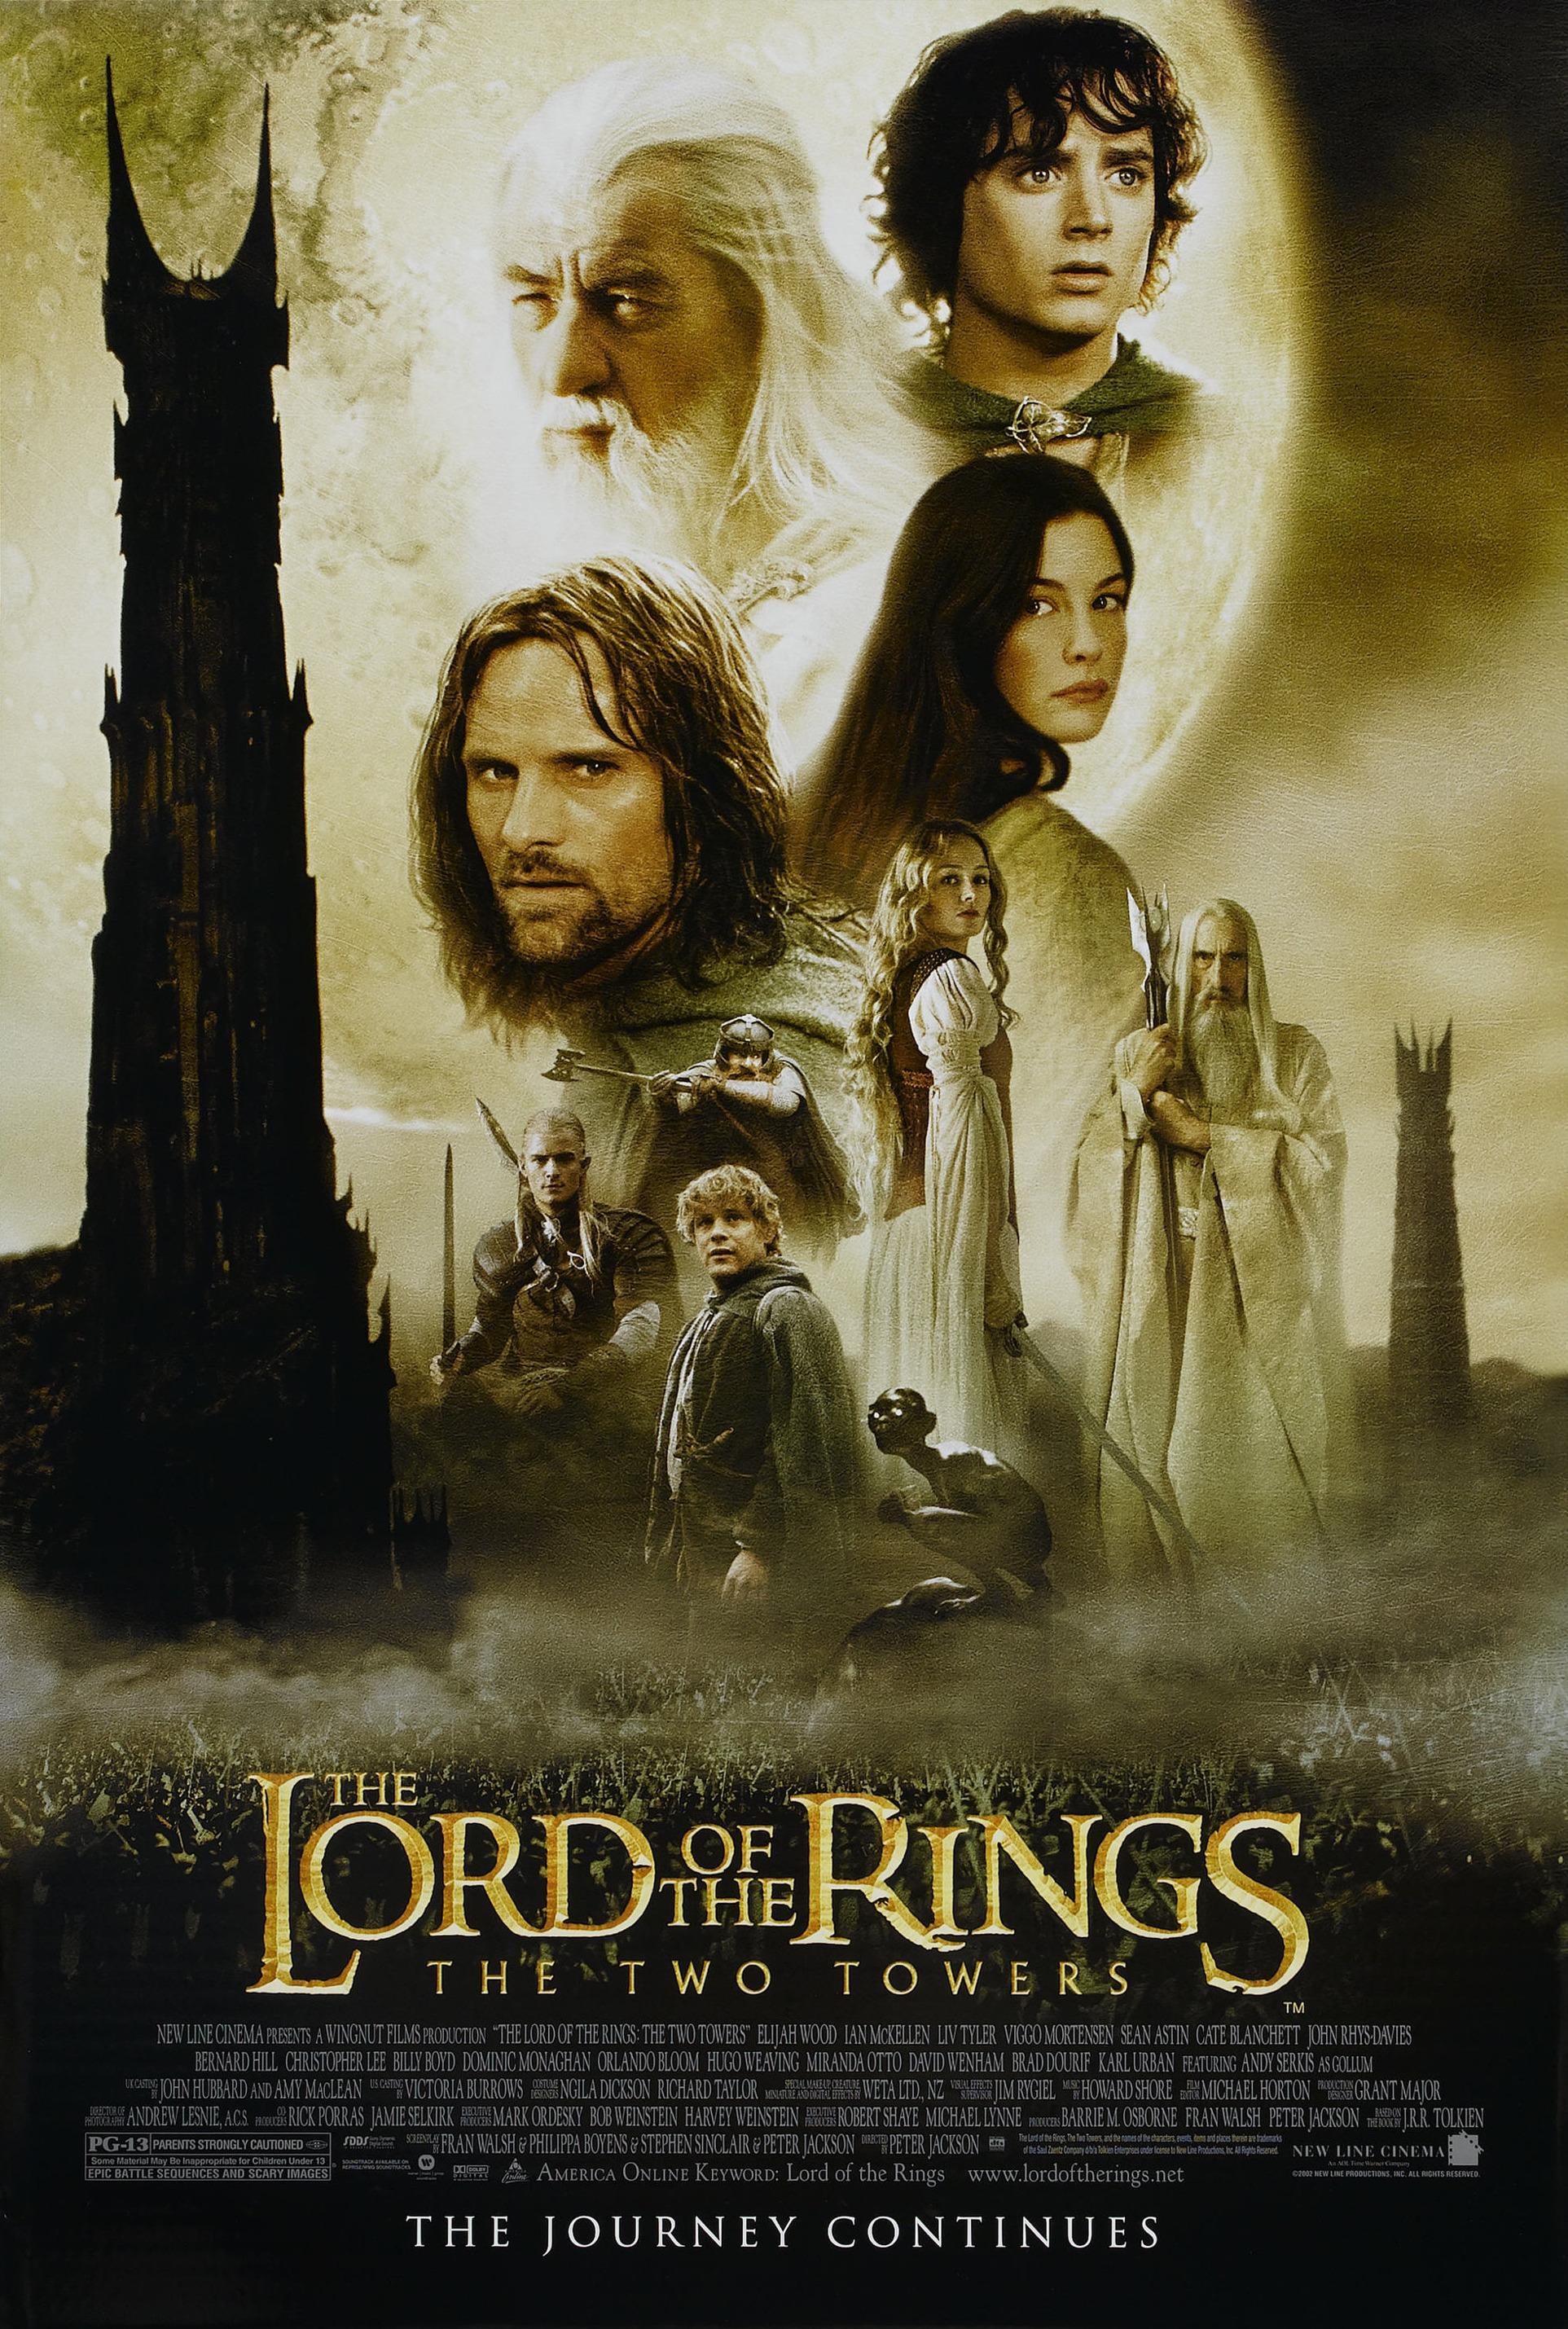 The Lord of the Rings - The Two Towers.jpg